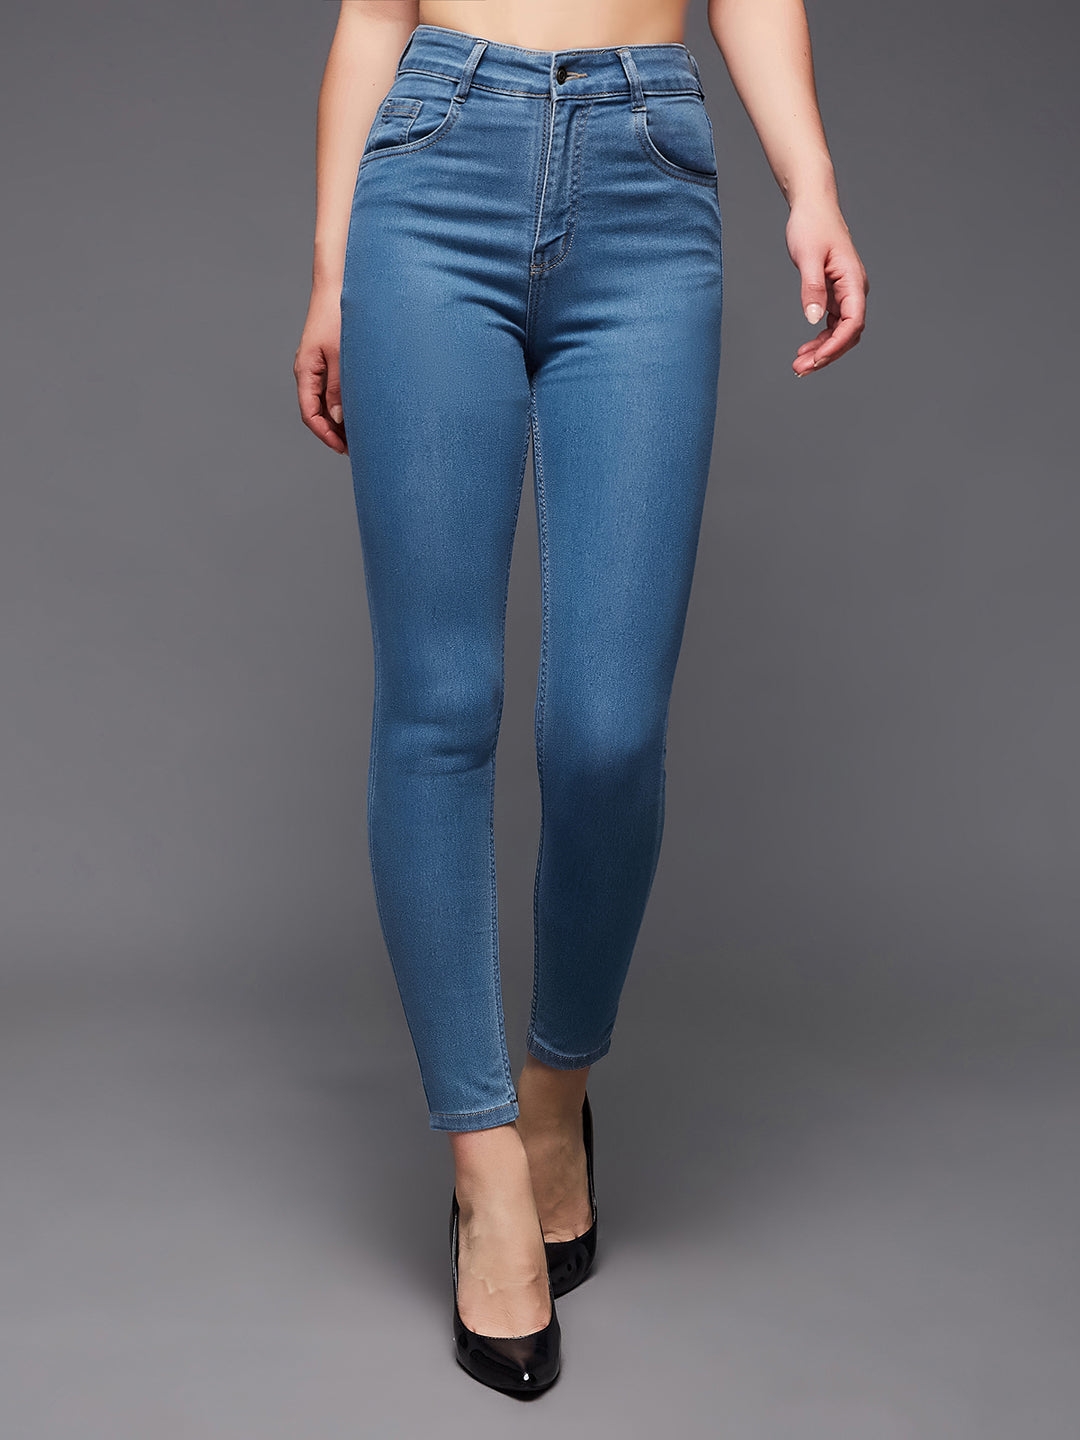 Blue Solid Skinny High Rise Clean Look Cropped Fringe Detailing Solid Stretchable Denim Jeans